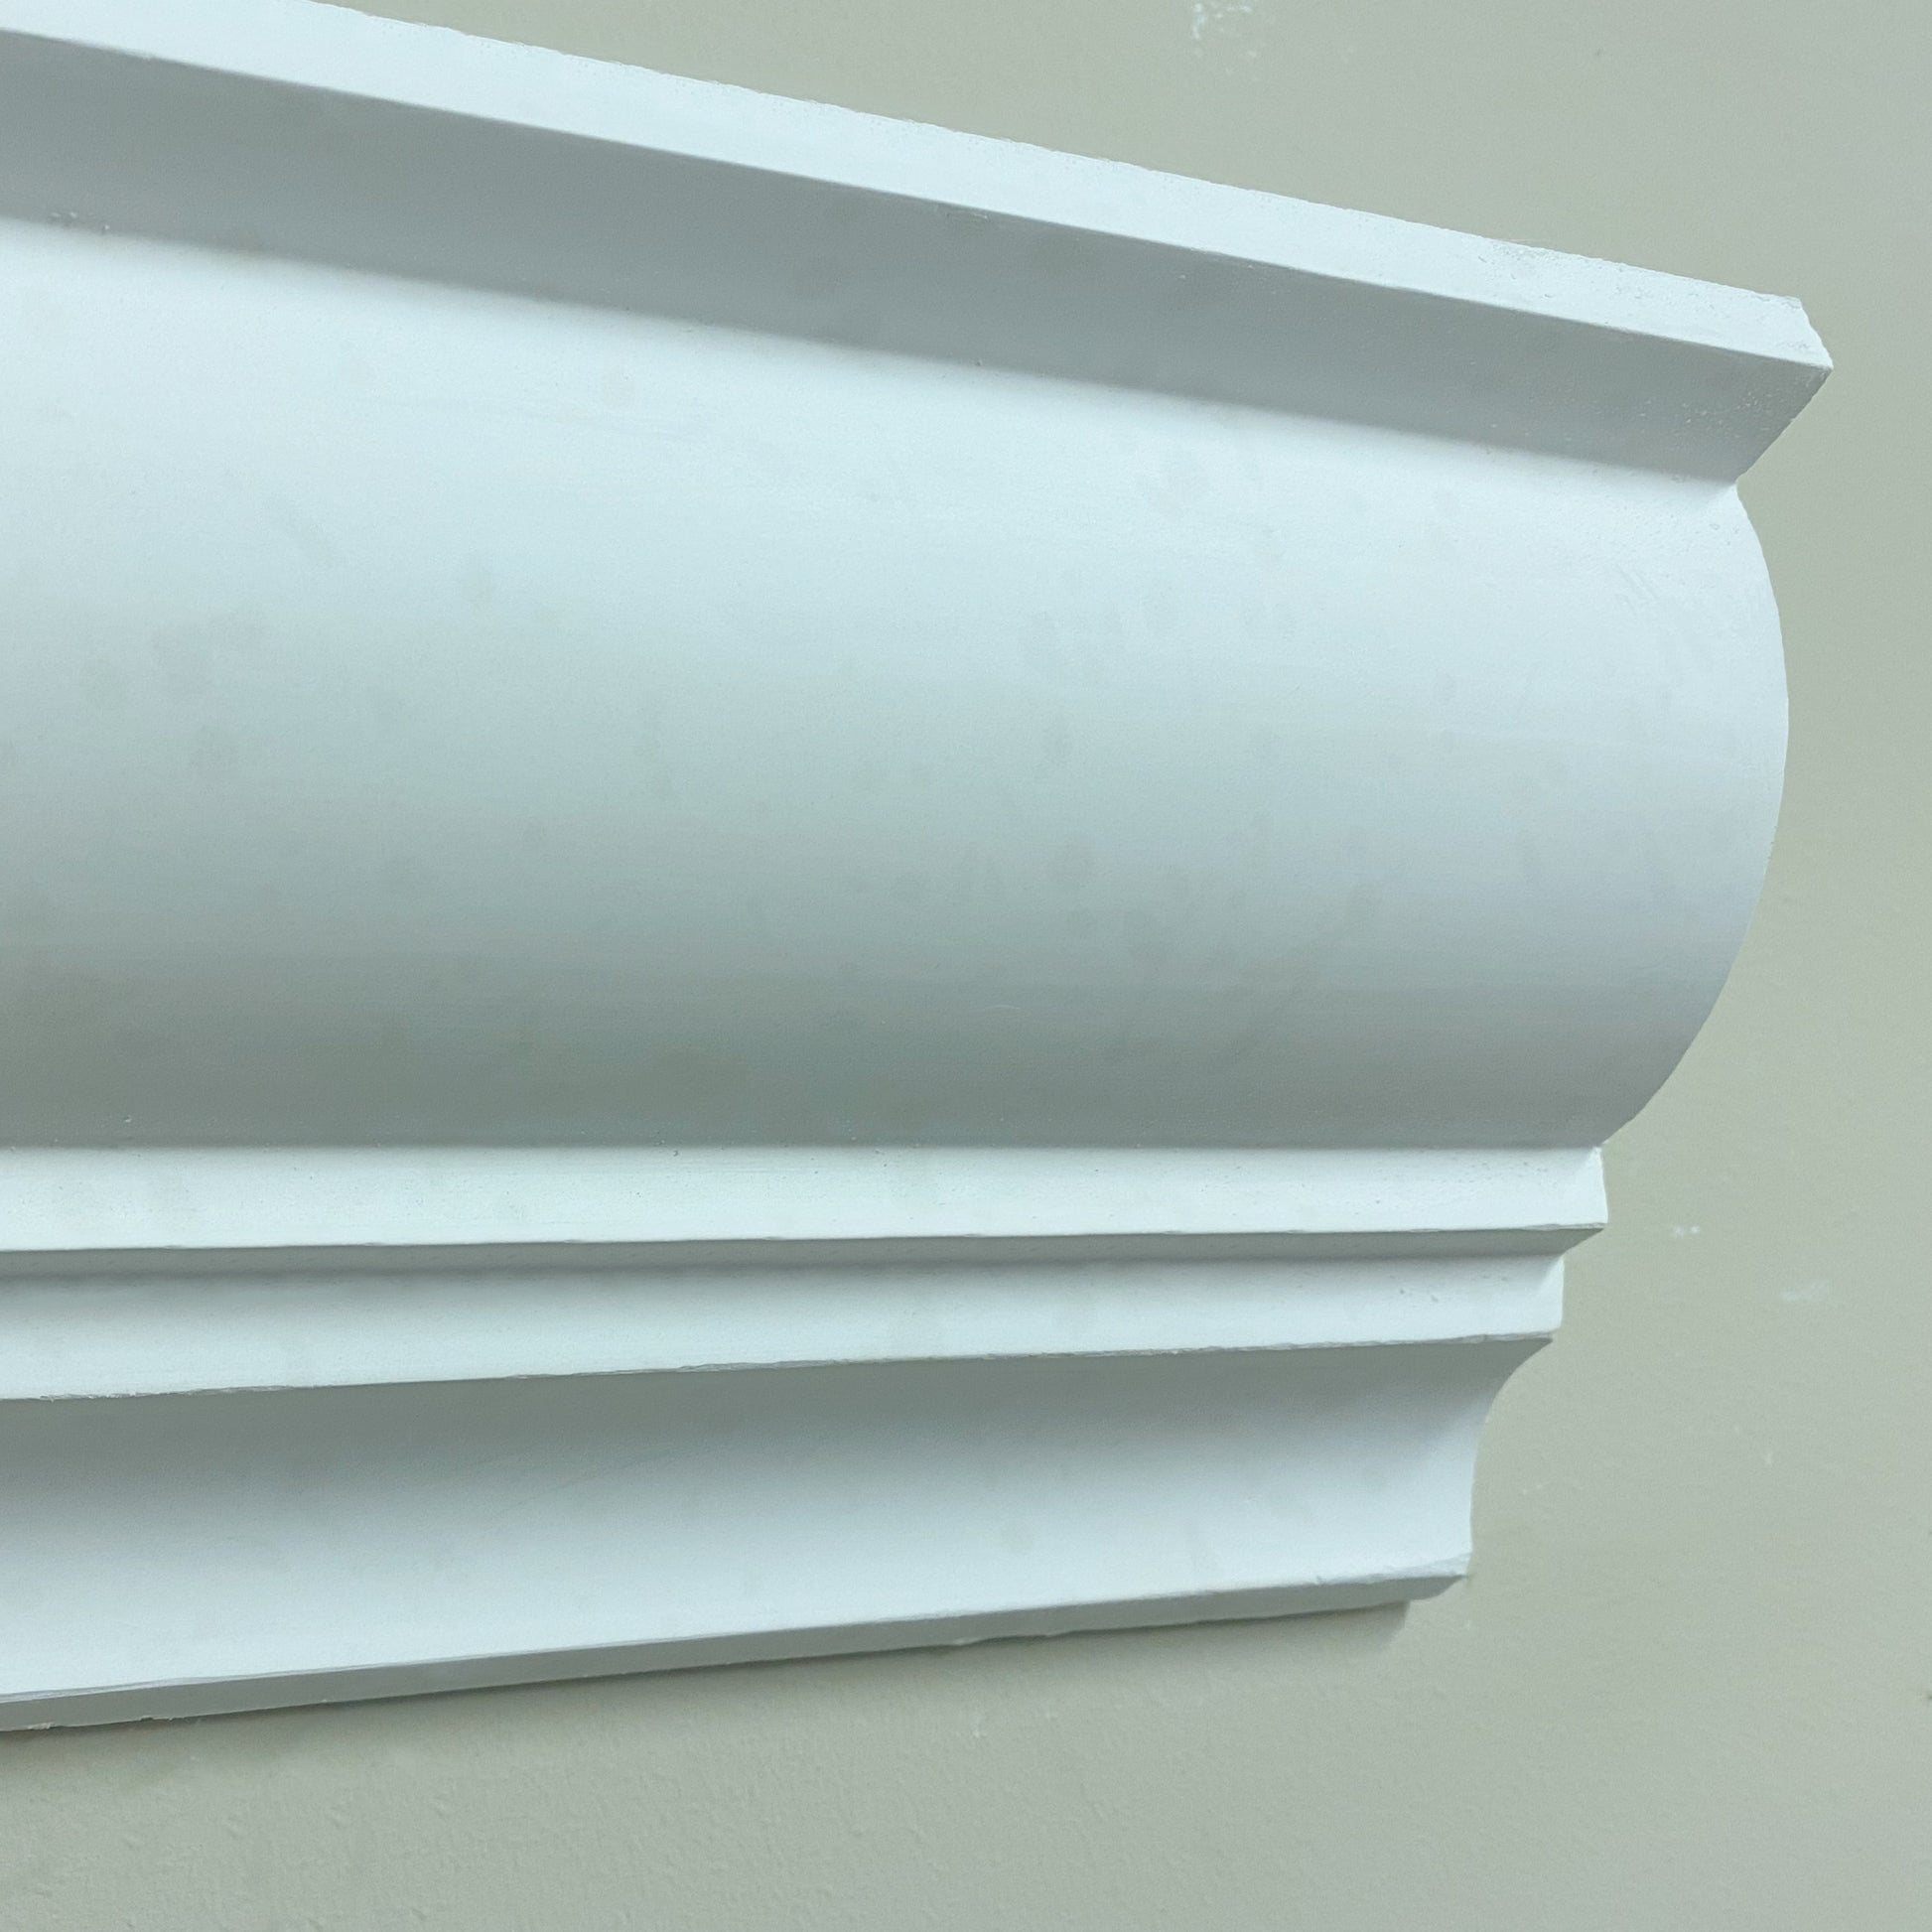 Ogee cornice - end detailing